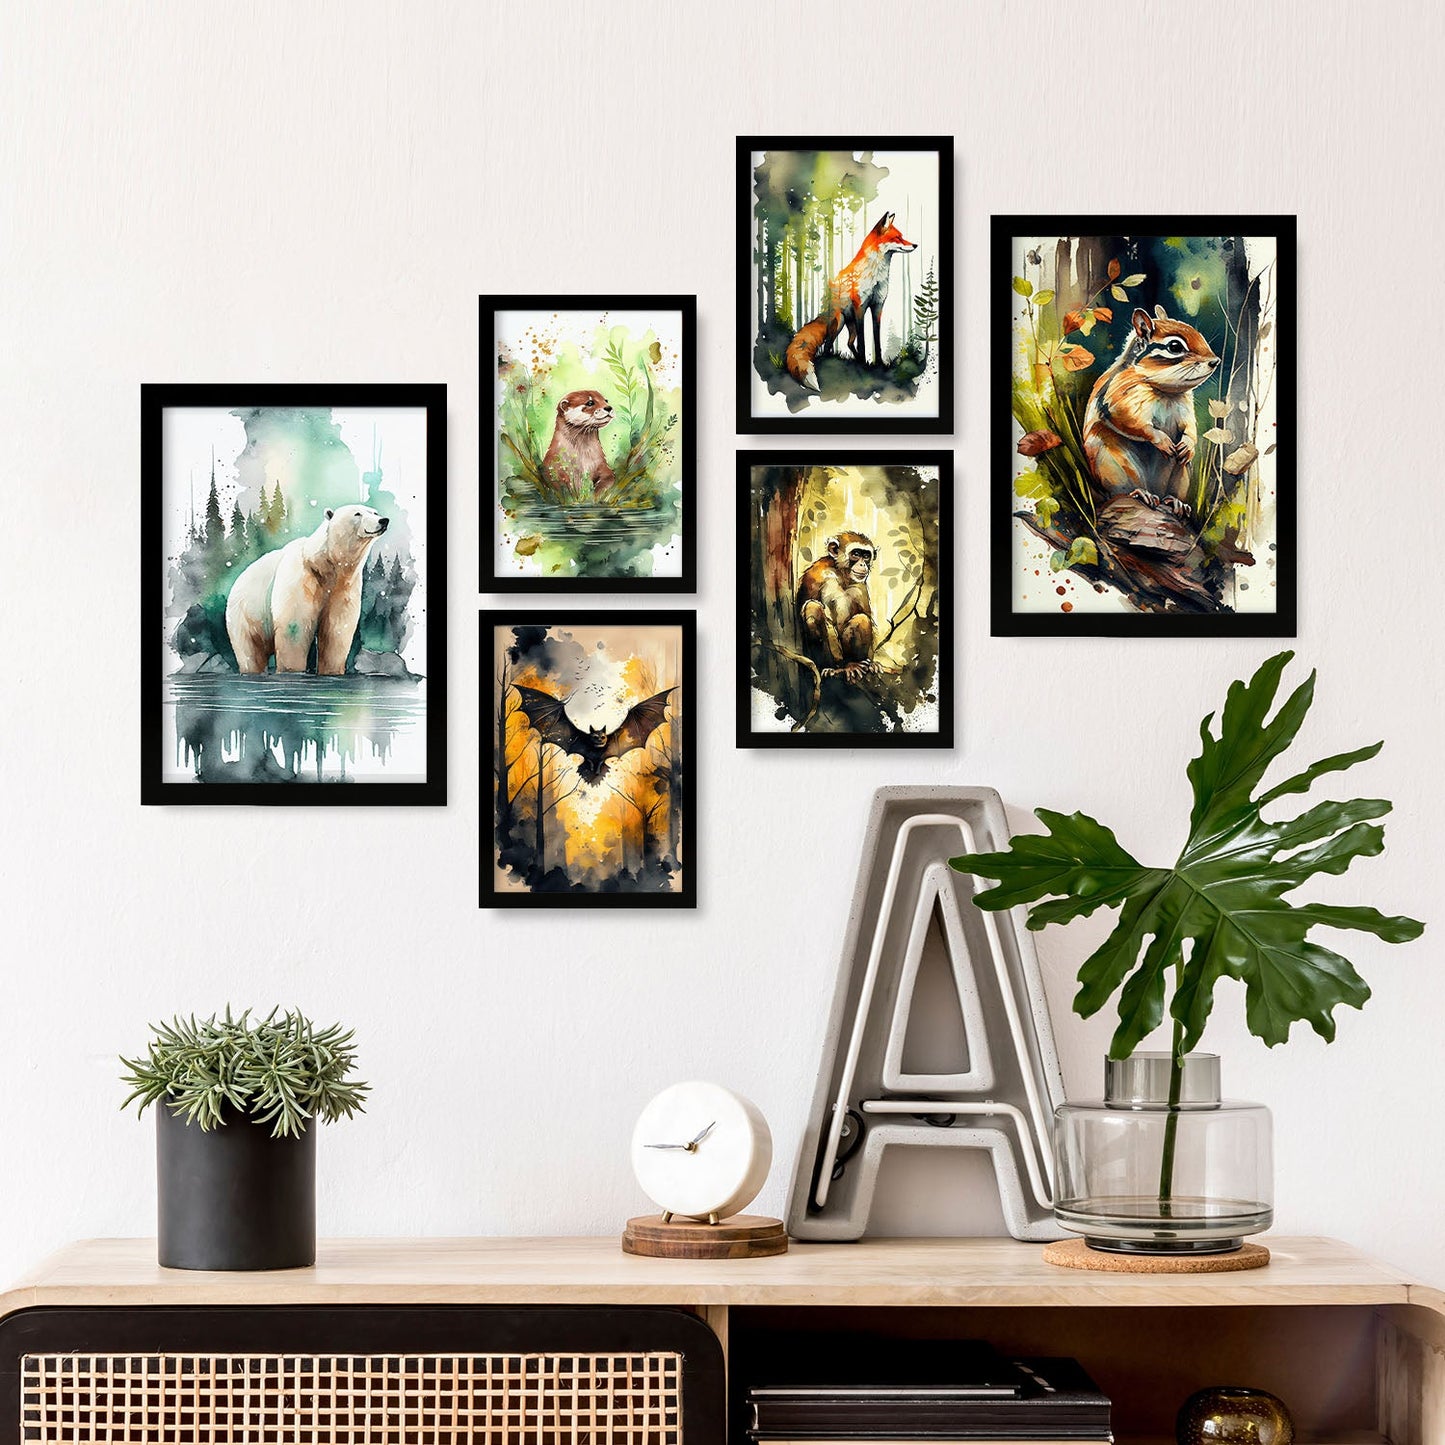 Nacnic Watercolor Animal Set_6. Aesthetic Wall Art Prints for Bedroom or Living Room Design.